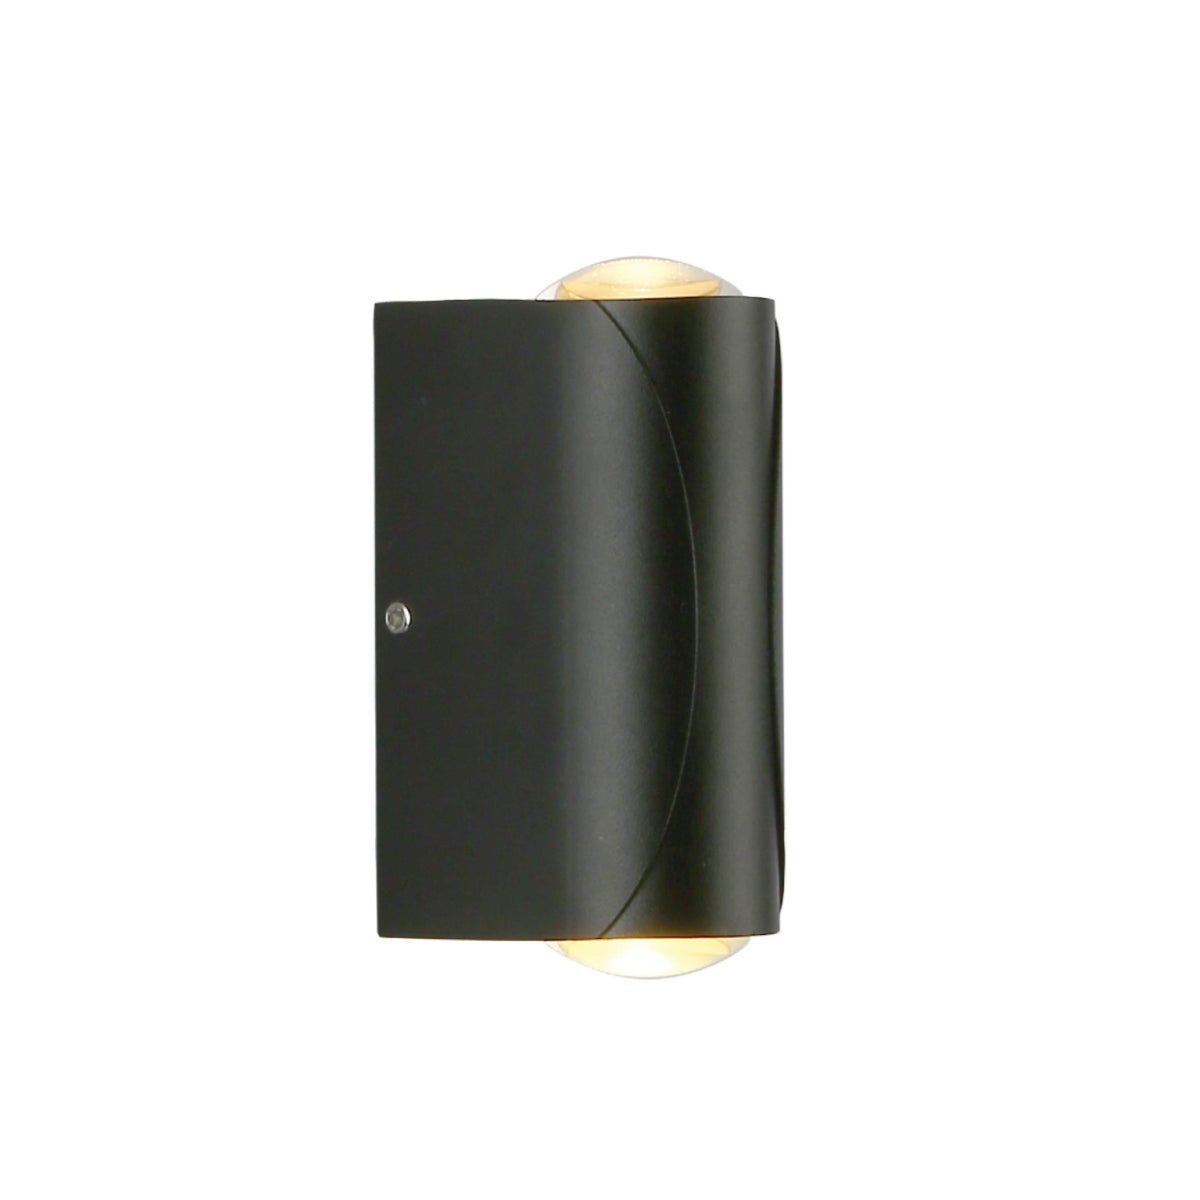 Main image of Black Corrugated Up Down Outdoor Modern LED Wall Light | TEKLED 183-03324